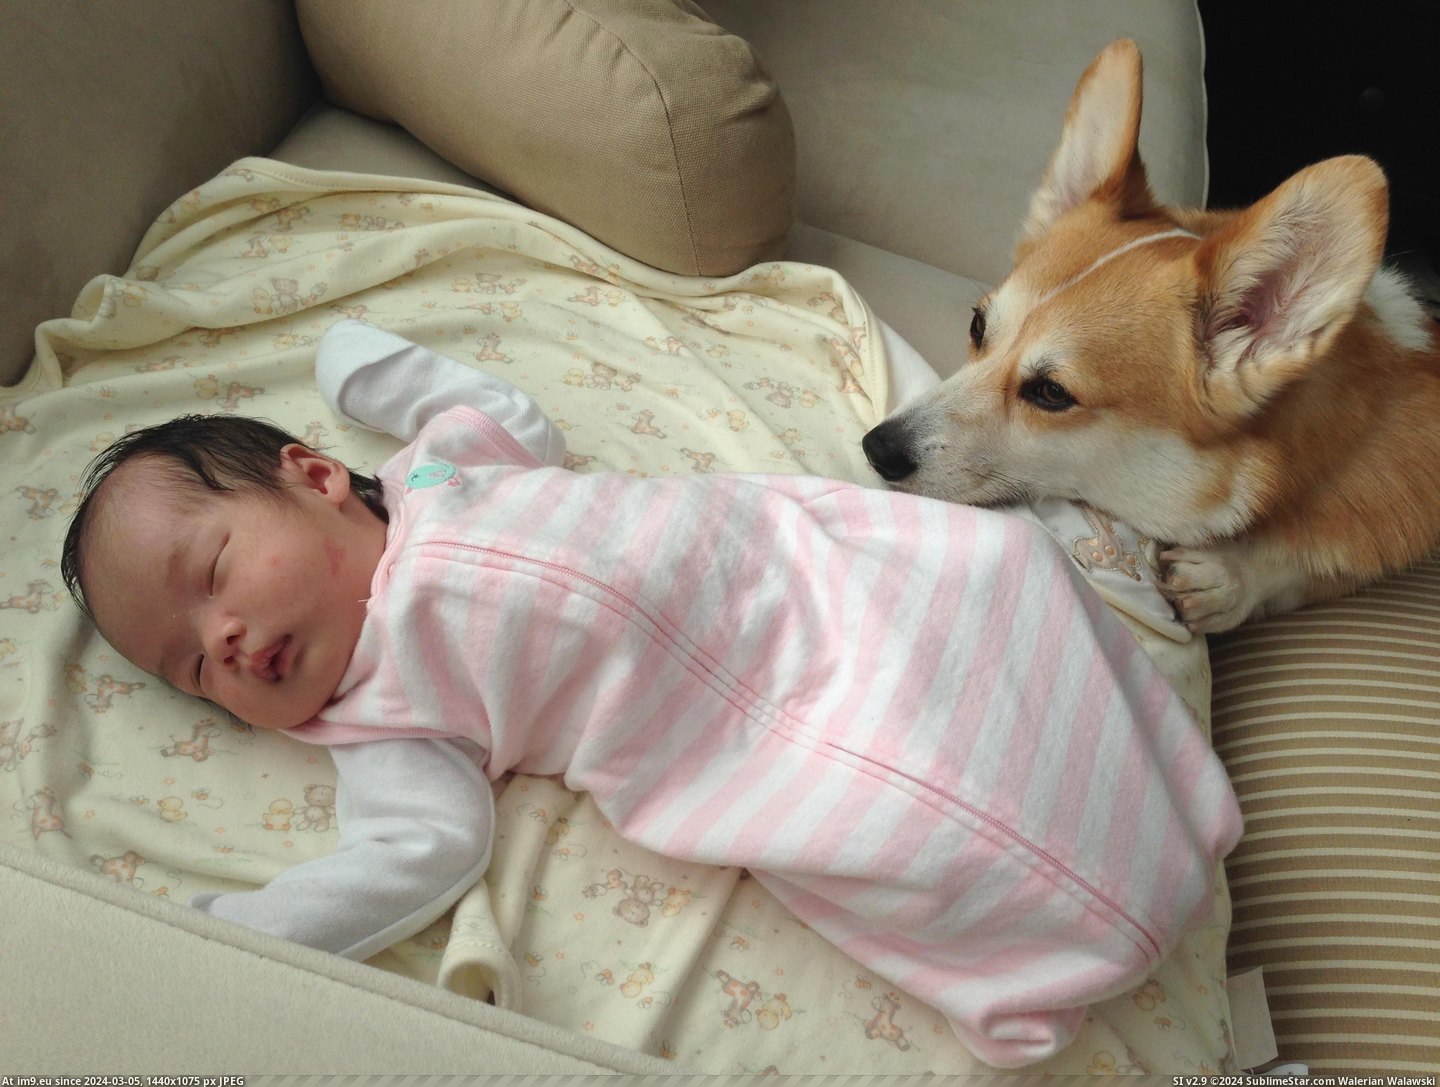 #Was #New #Ago #But #How #Daughter #Weeks #Born [Aww] My daughter was born three weeks ago. I worried about how my corgi would react but he's treating her like his new BFF... 3 Pic. (Изображение из альбом My r/AWW favs))